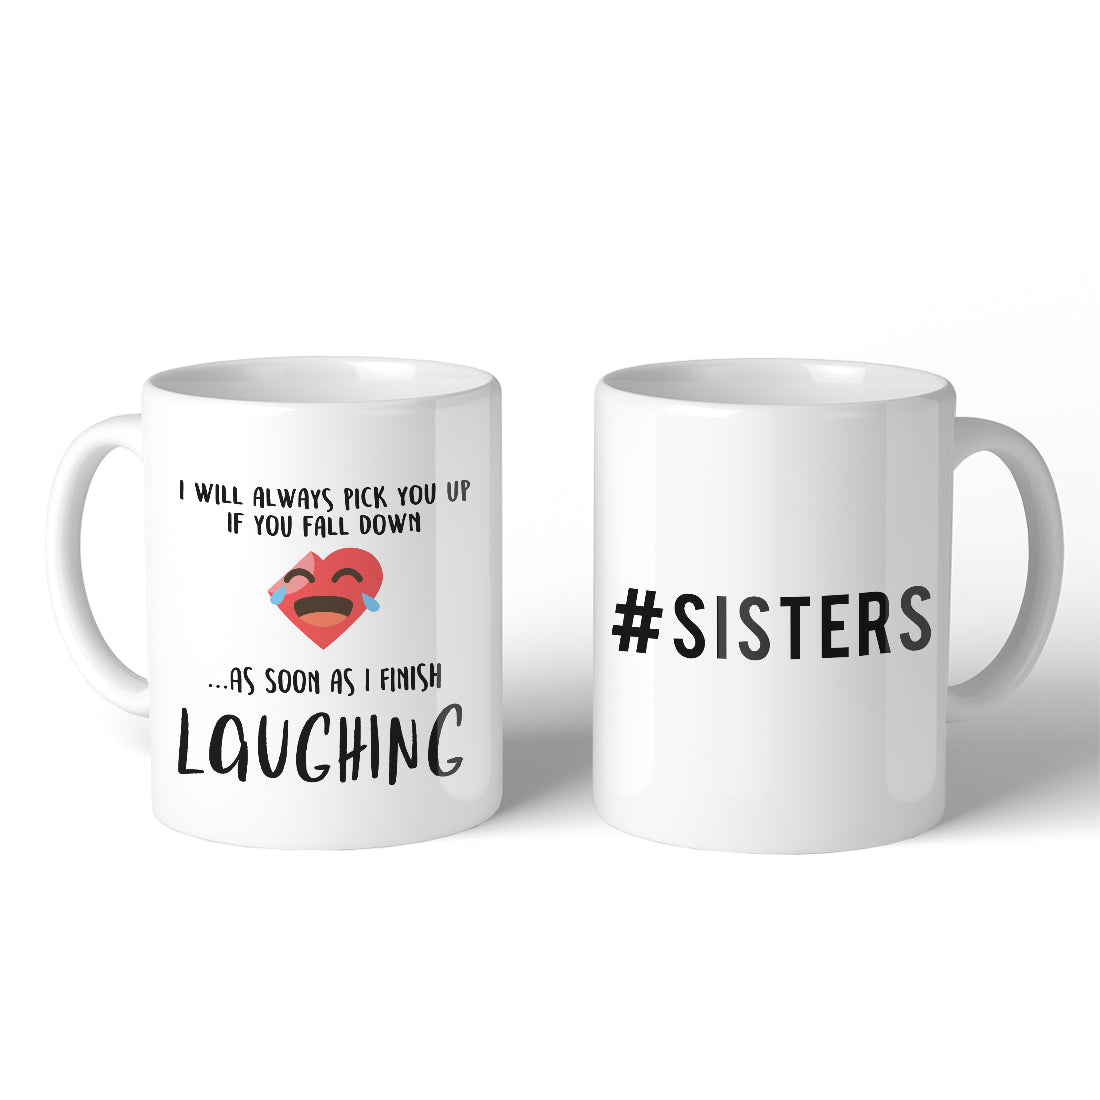 40+ Gift Ideas For Brothers From Sisters | Gifts for brother, Best gift for  brother, 40th gifts